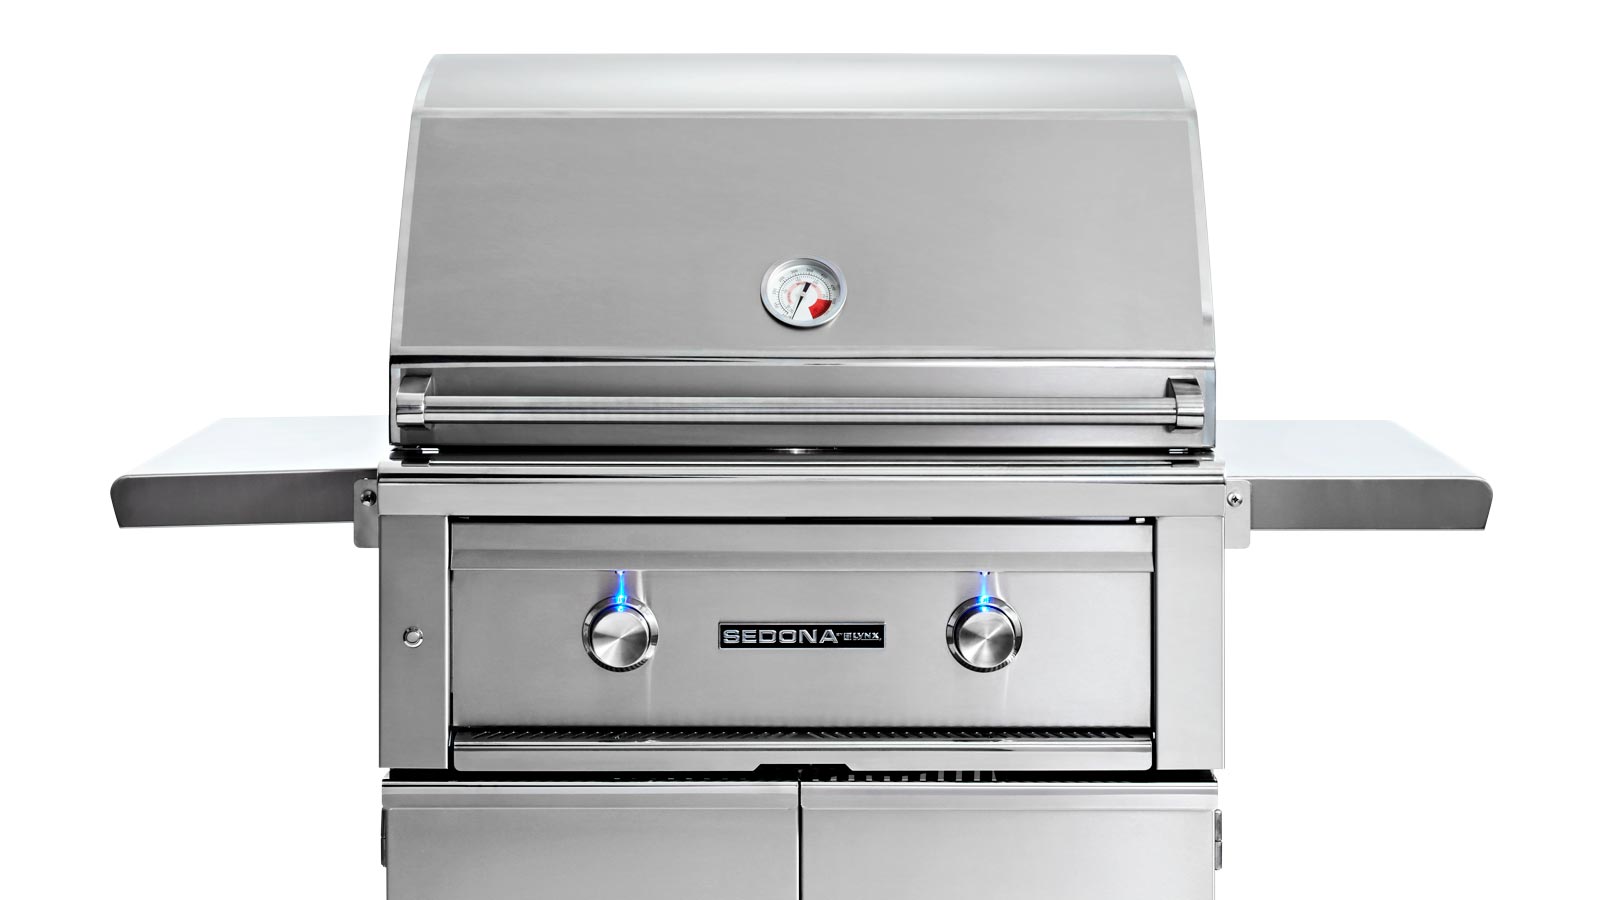 30" Freestanding Grill with 2 Stainless Steel Burners (L500F)